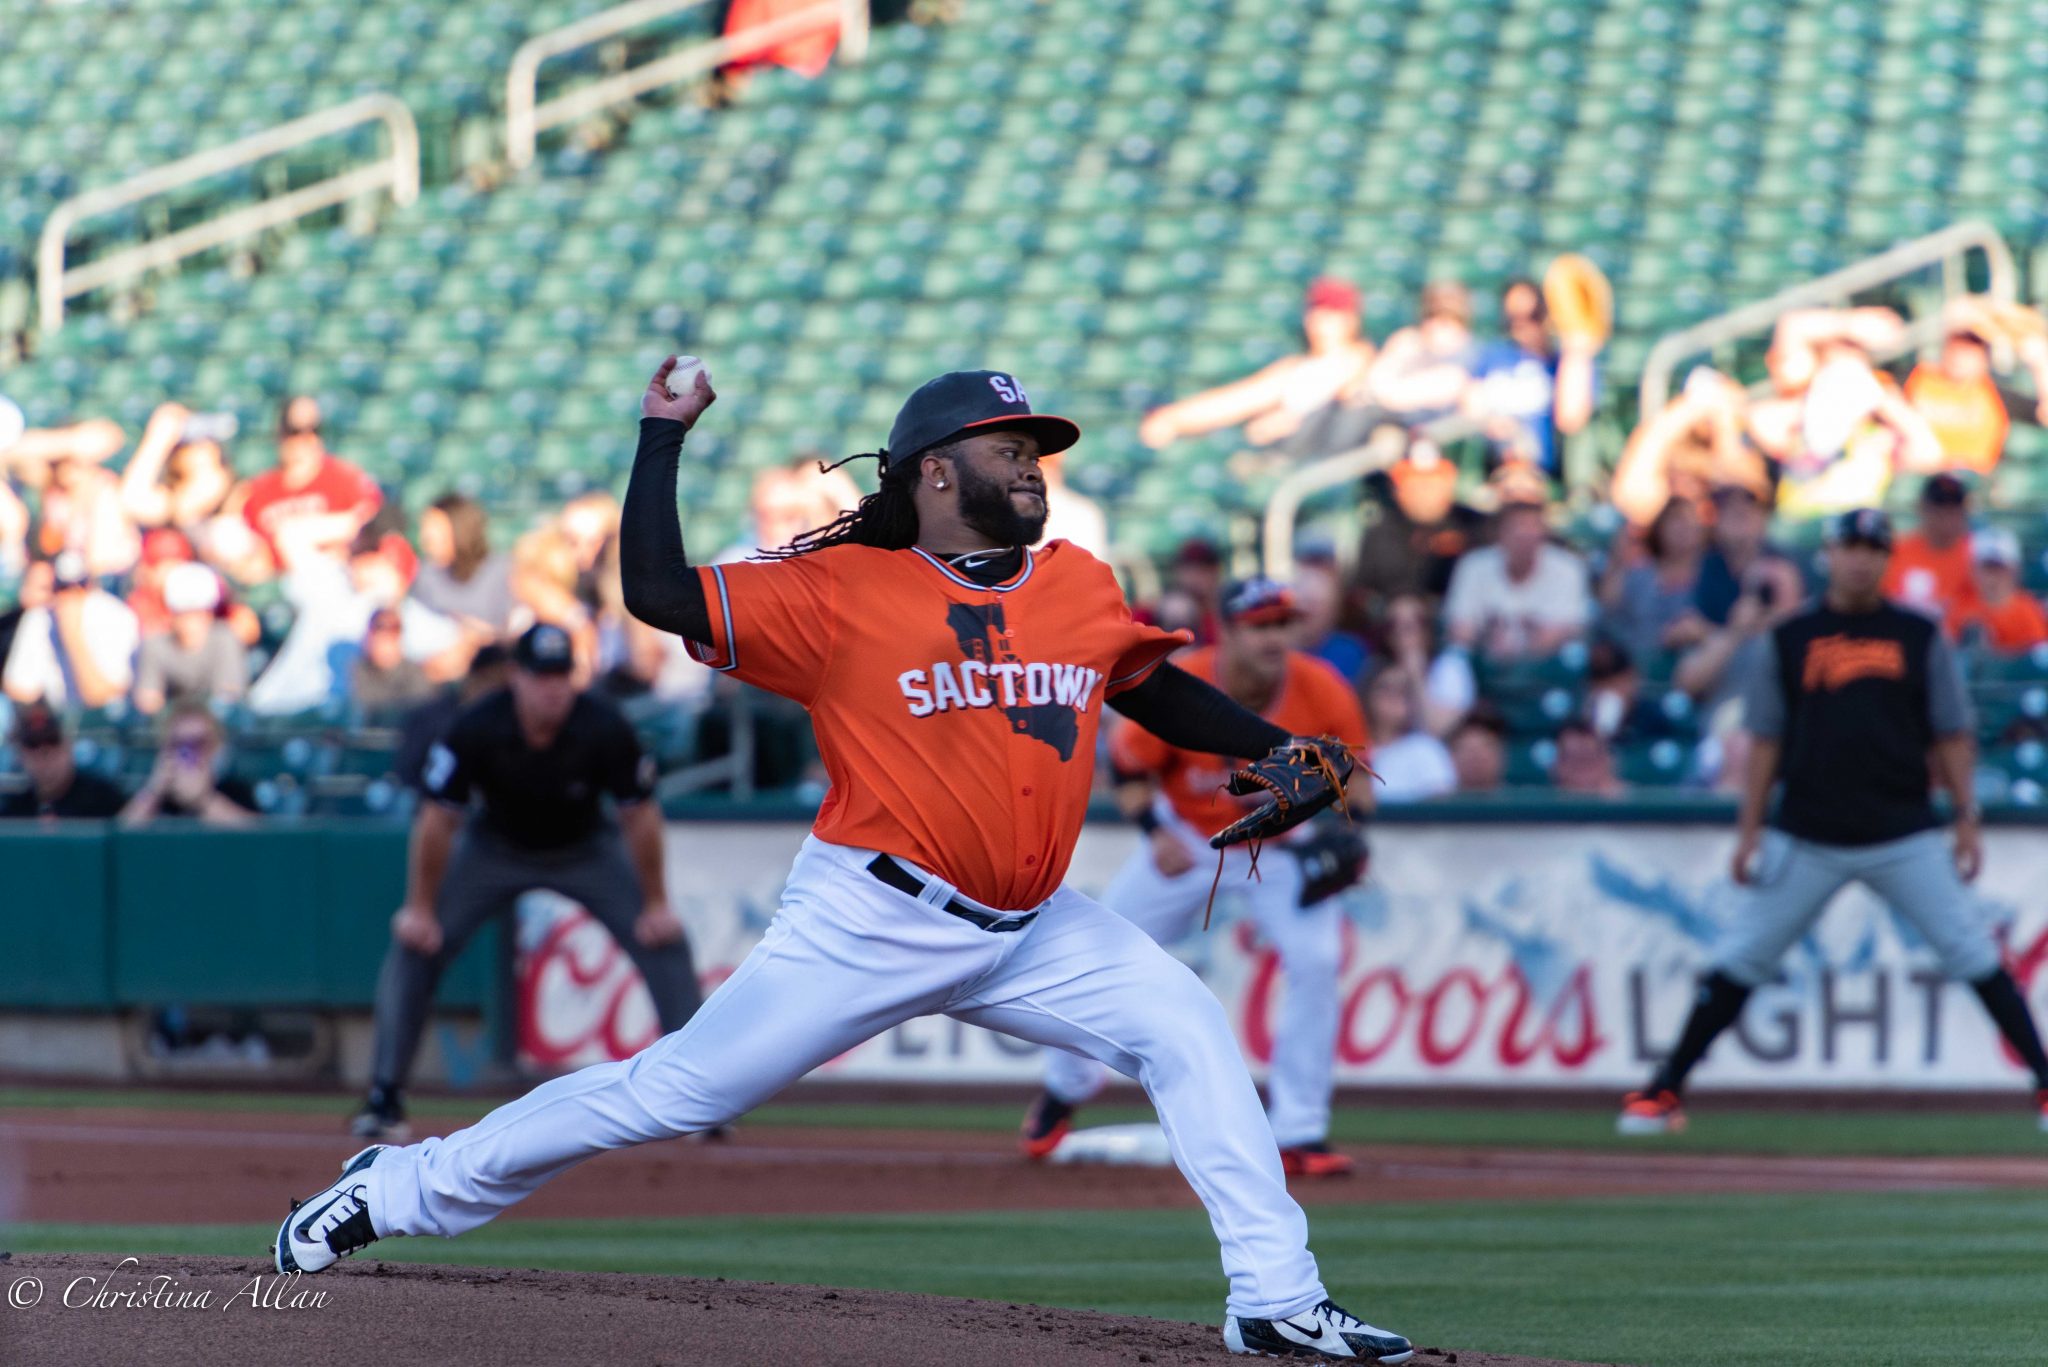 Johnny cueto, giants, pitching, river cats, fresno grizzlies, chris.allan, sports photo, photography, west sacramento